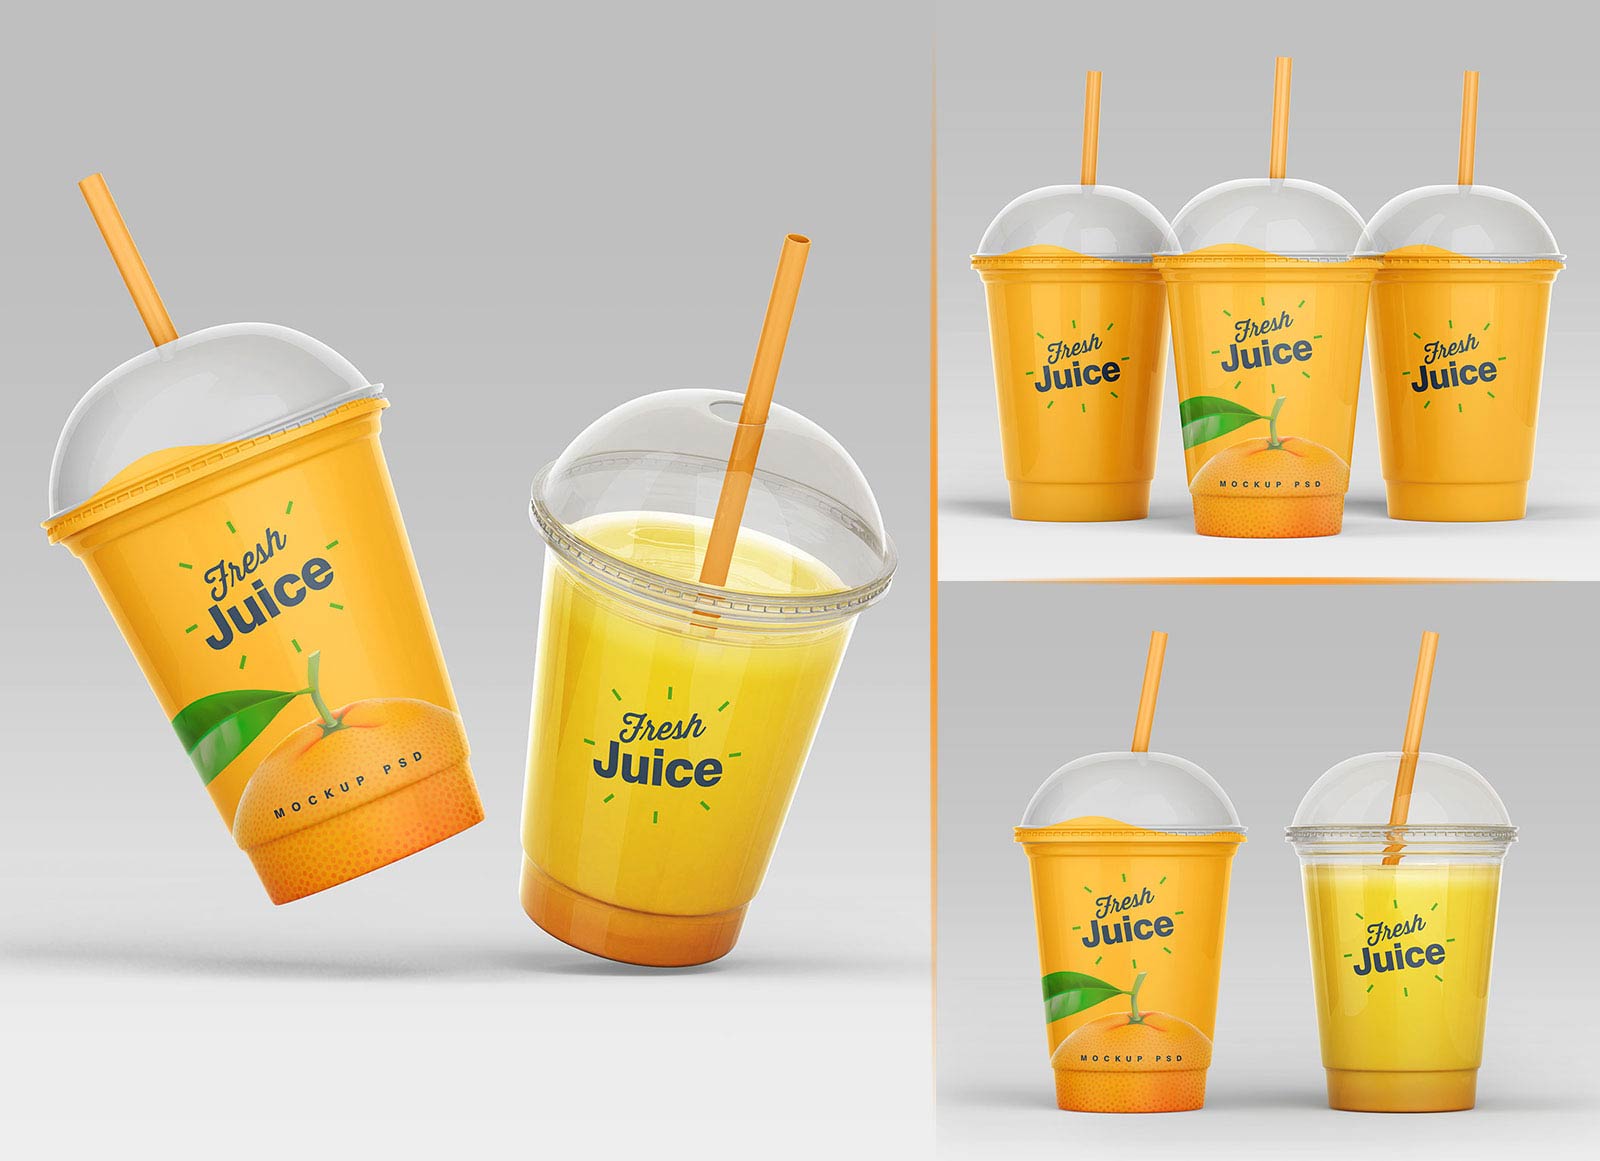 Disposable plastic Transperent juice cup with lid